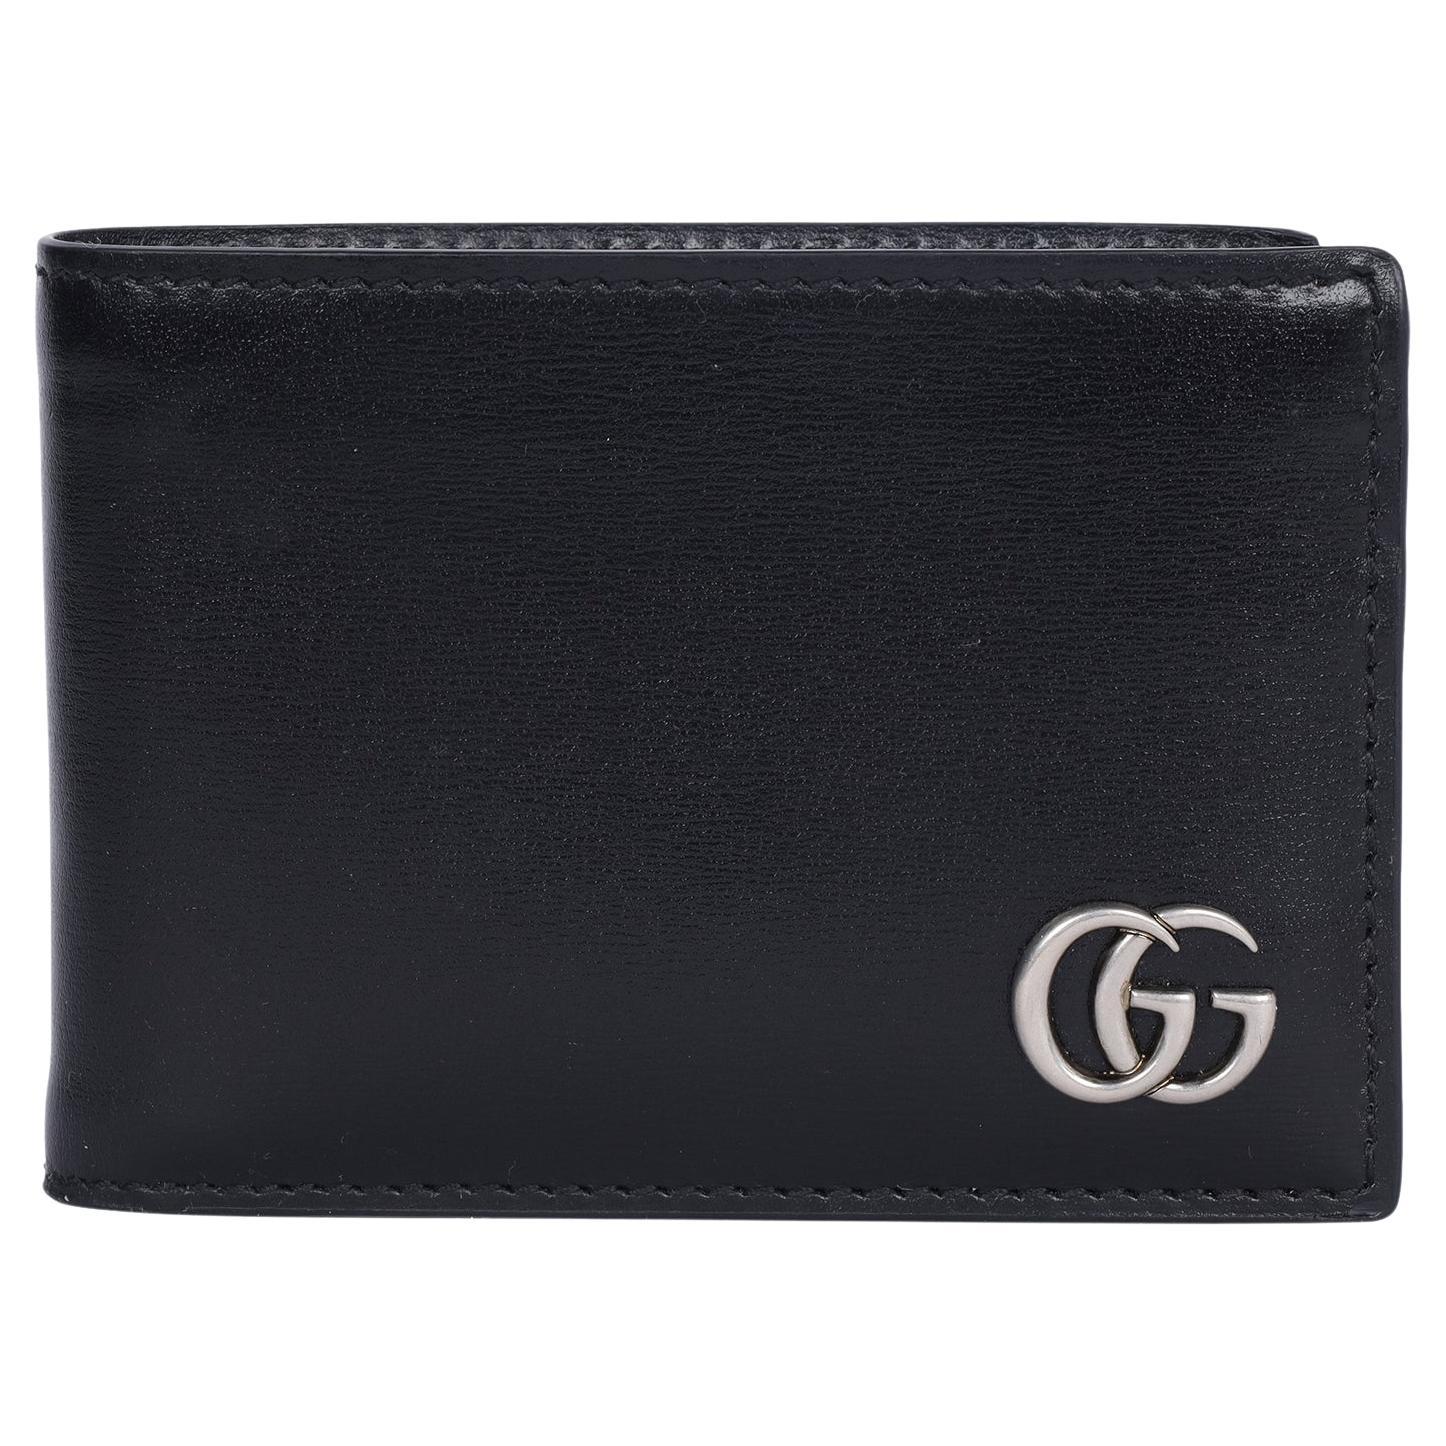 Gucci GG Marmont Black Leather Bi Fold Wallet For Sale